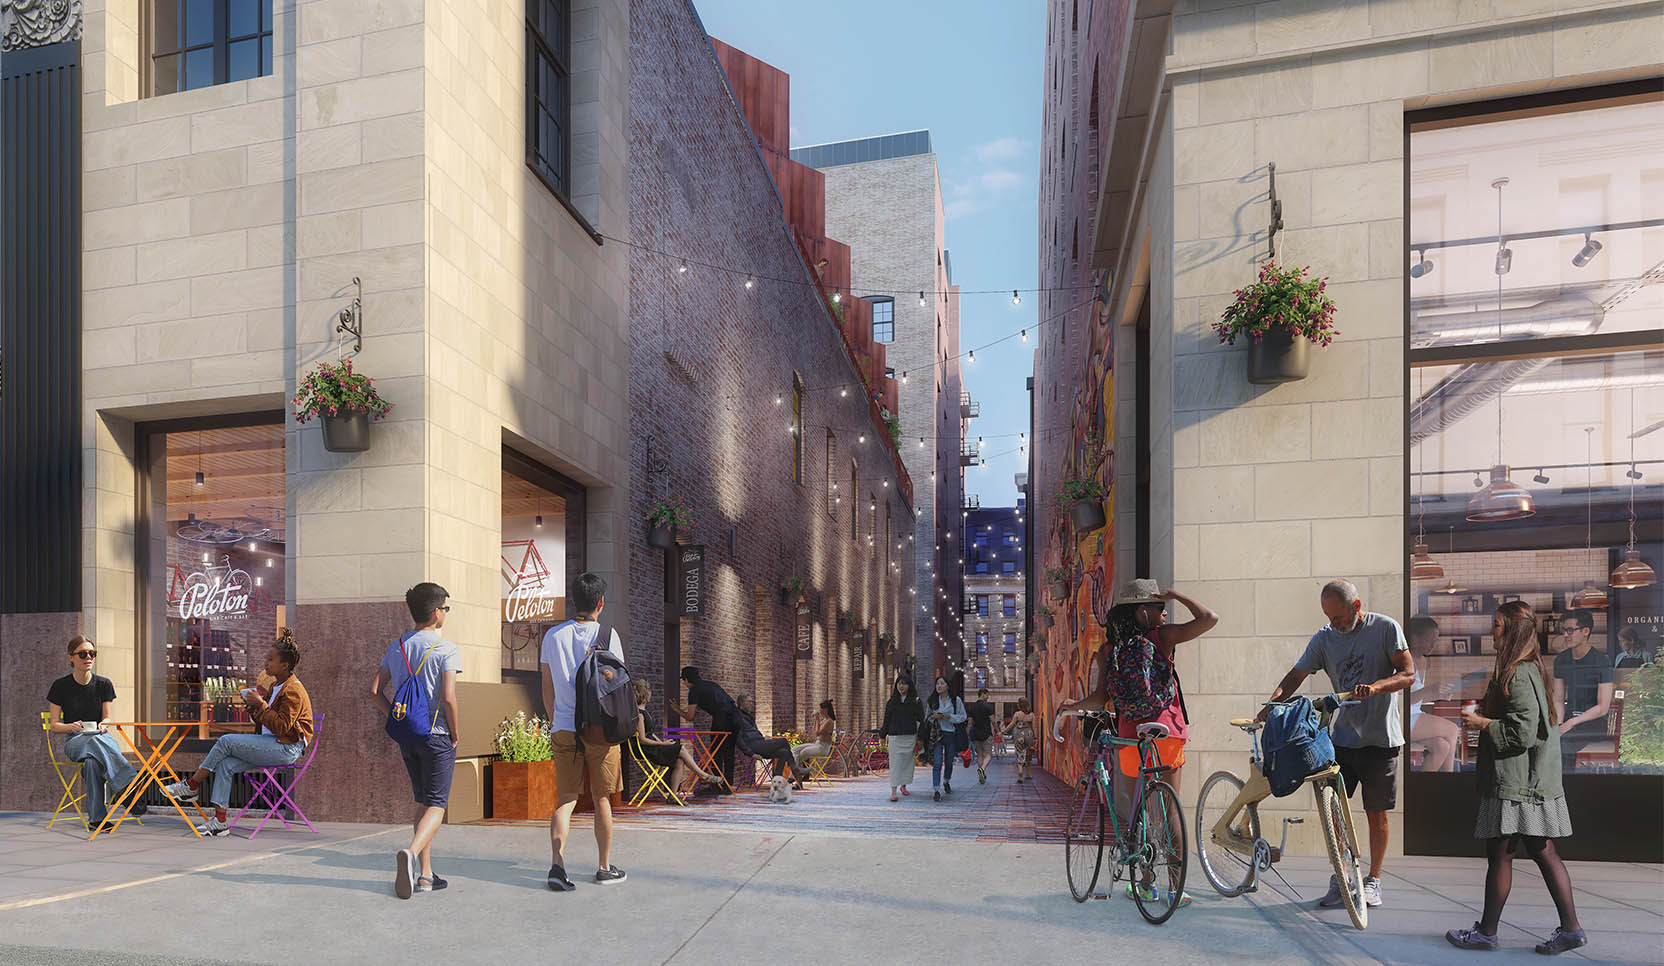 A new rendering depicting RailSpur's alleyway, the retail within, and visitors